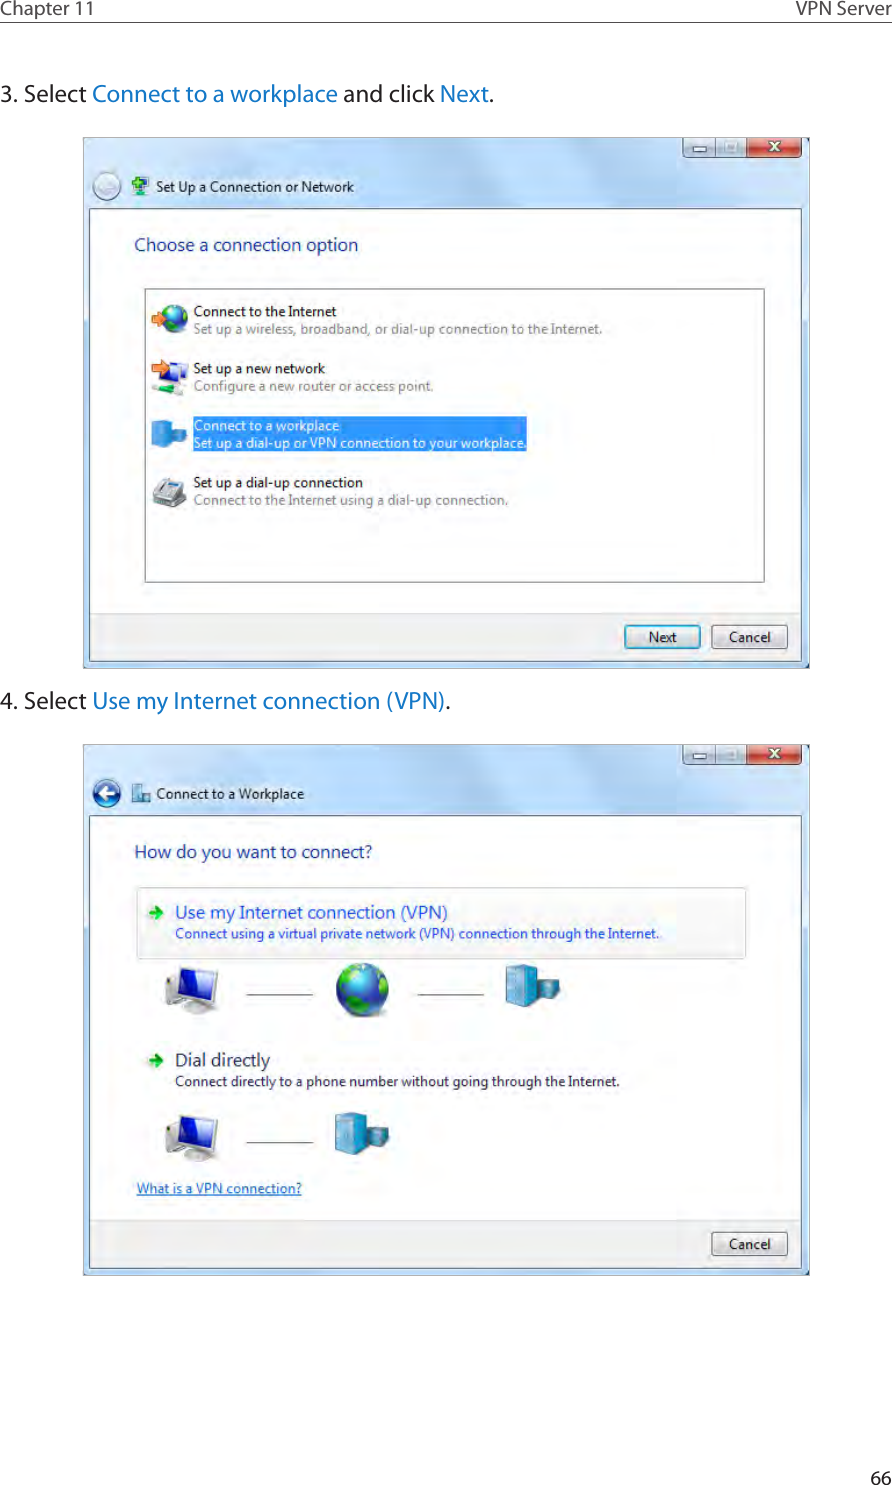 66Chapter 11 VPN Server3. Select Connect to a workplace and click Next.4. Select Use my Internet connection (VPN).